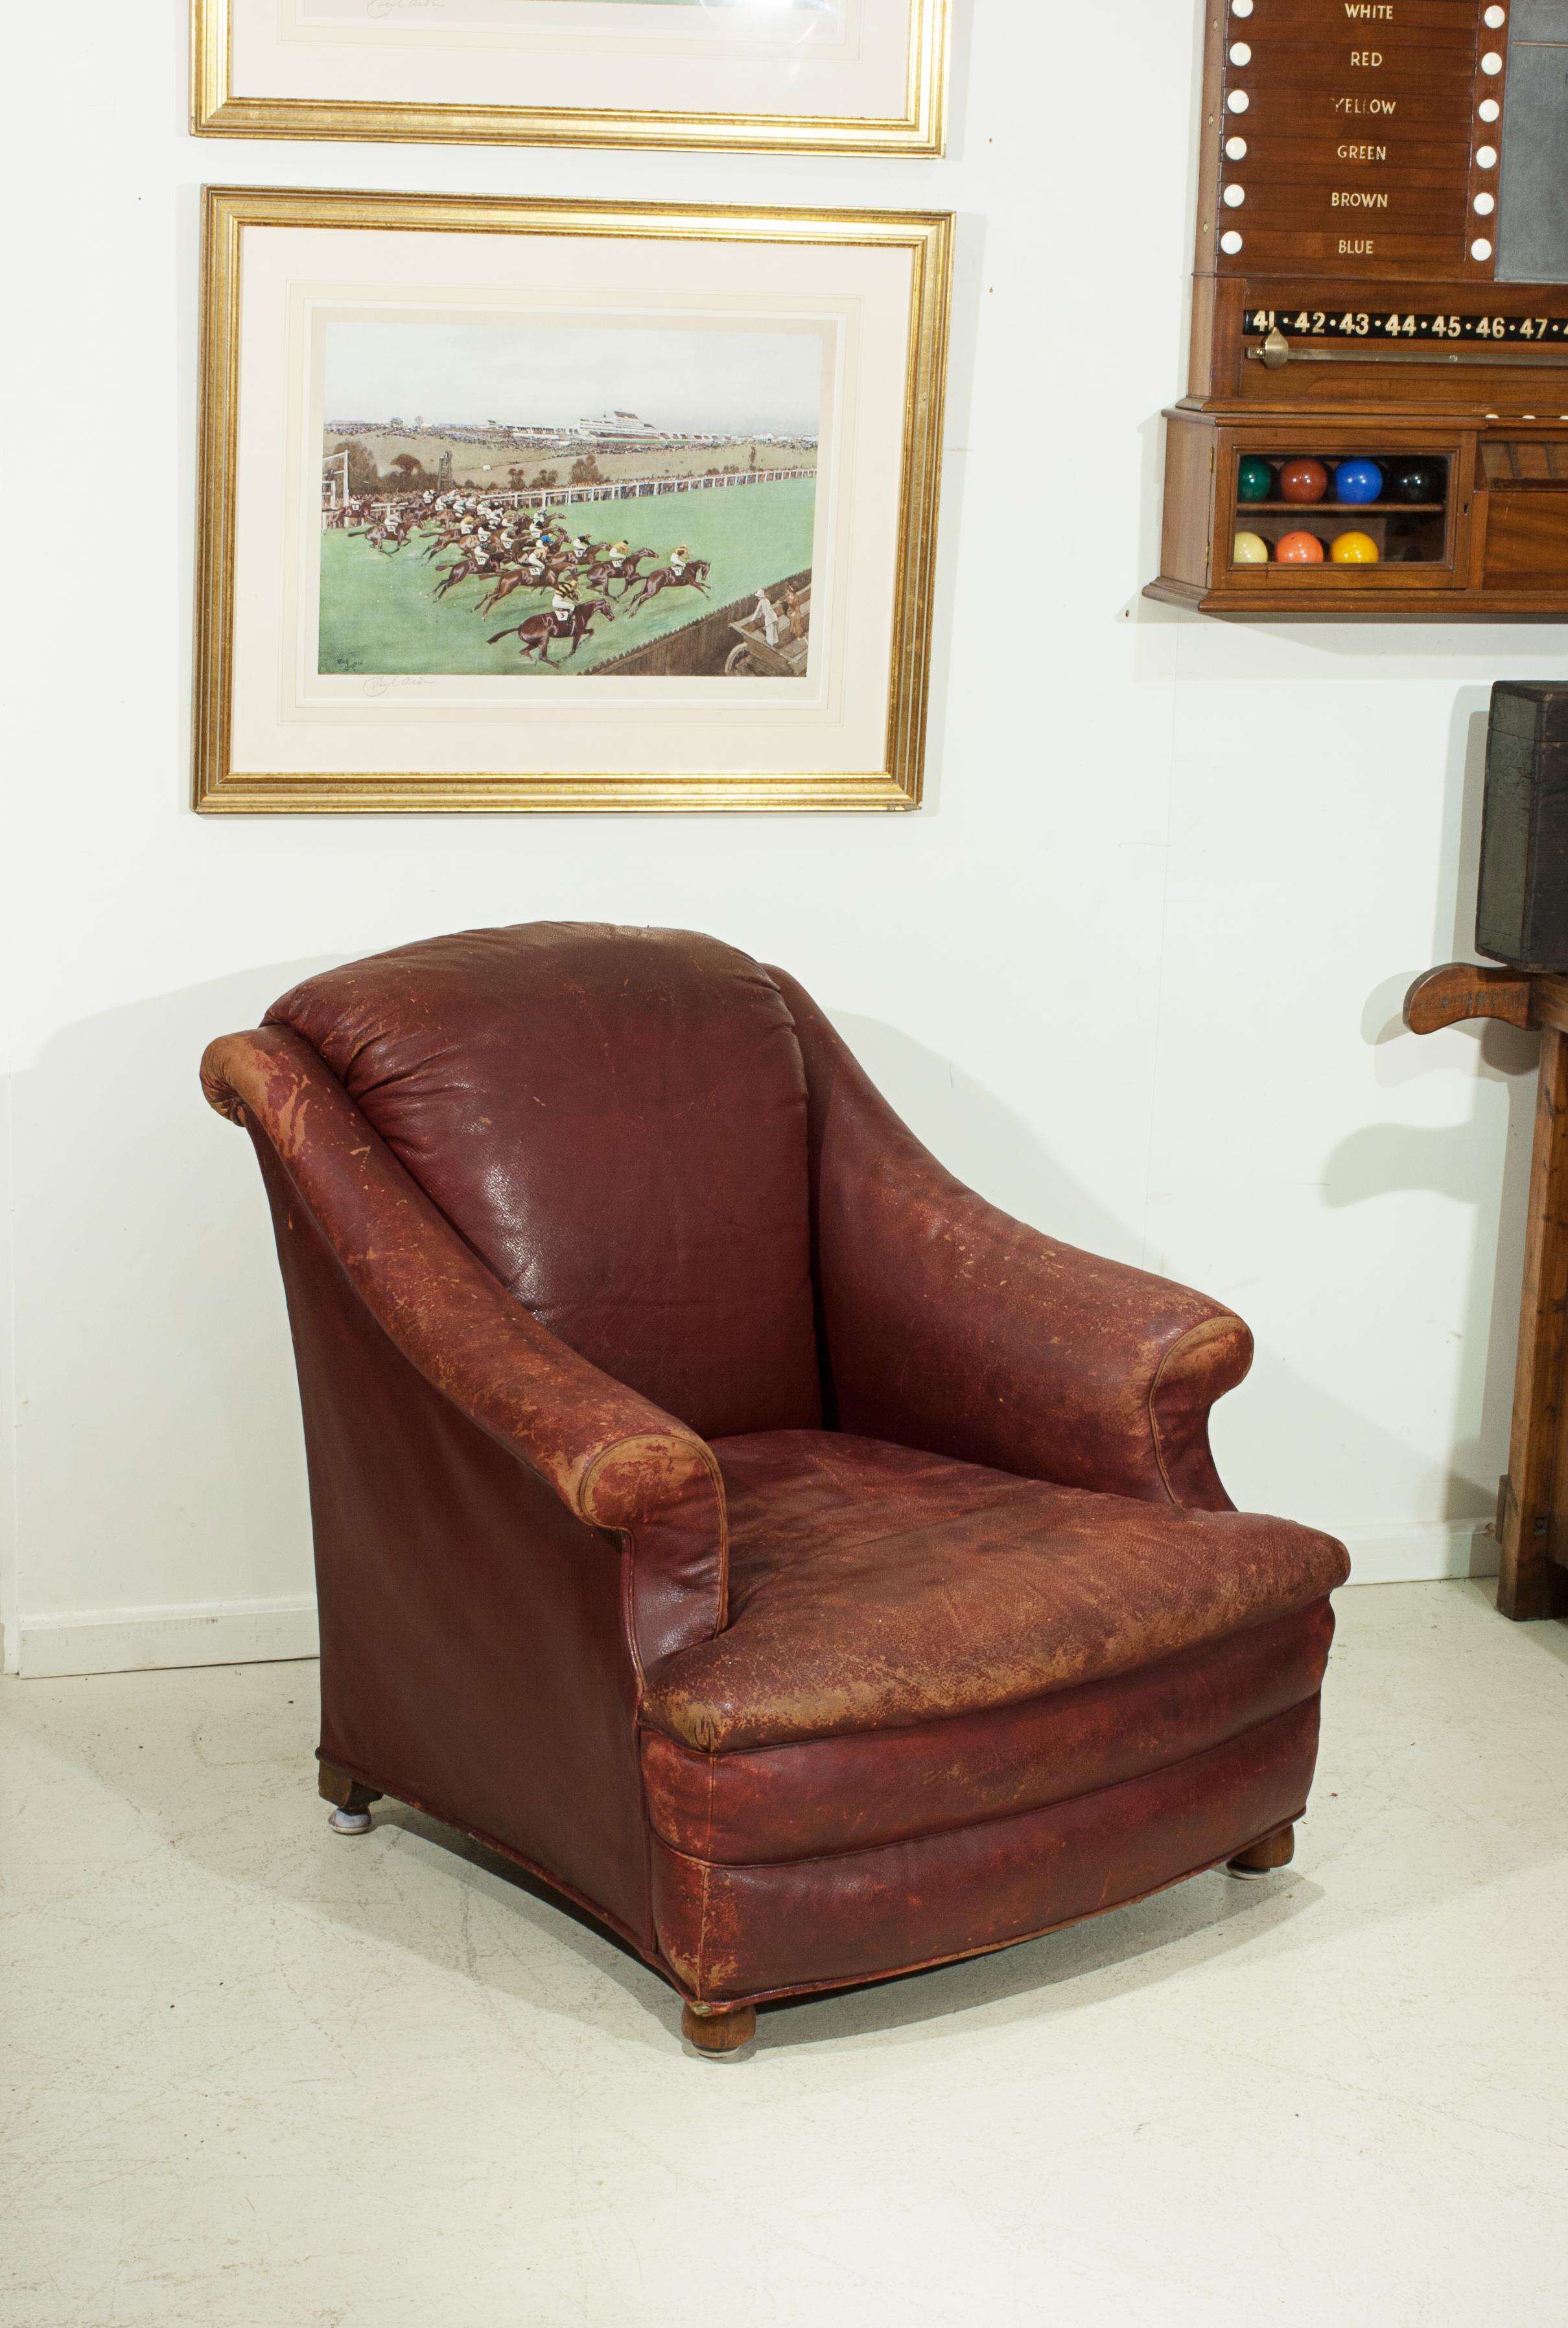 A late 19th, early 20th century leather club arm chair, with scroll-over back and arms upholstered with the original red leather. The easy chair raised on front bun feet and square rear legs, all fitted with carpet glides. The easy chair is a